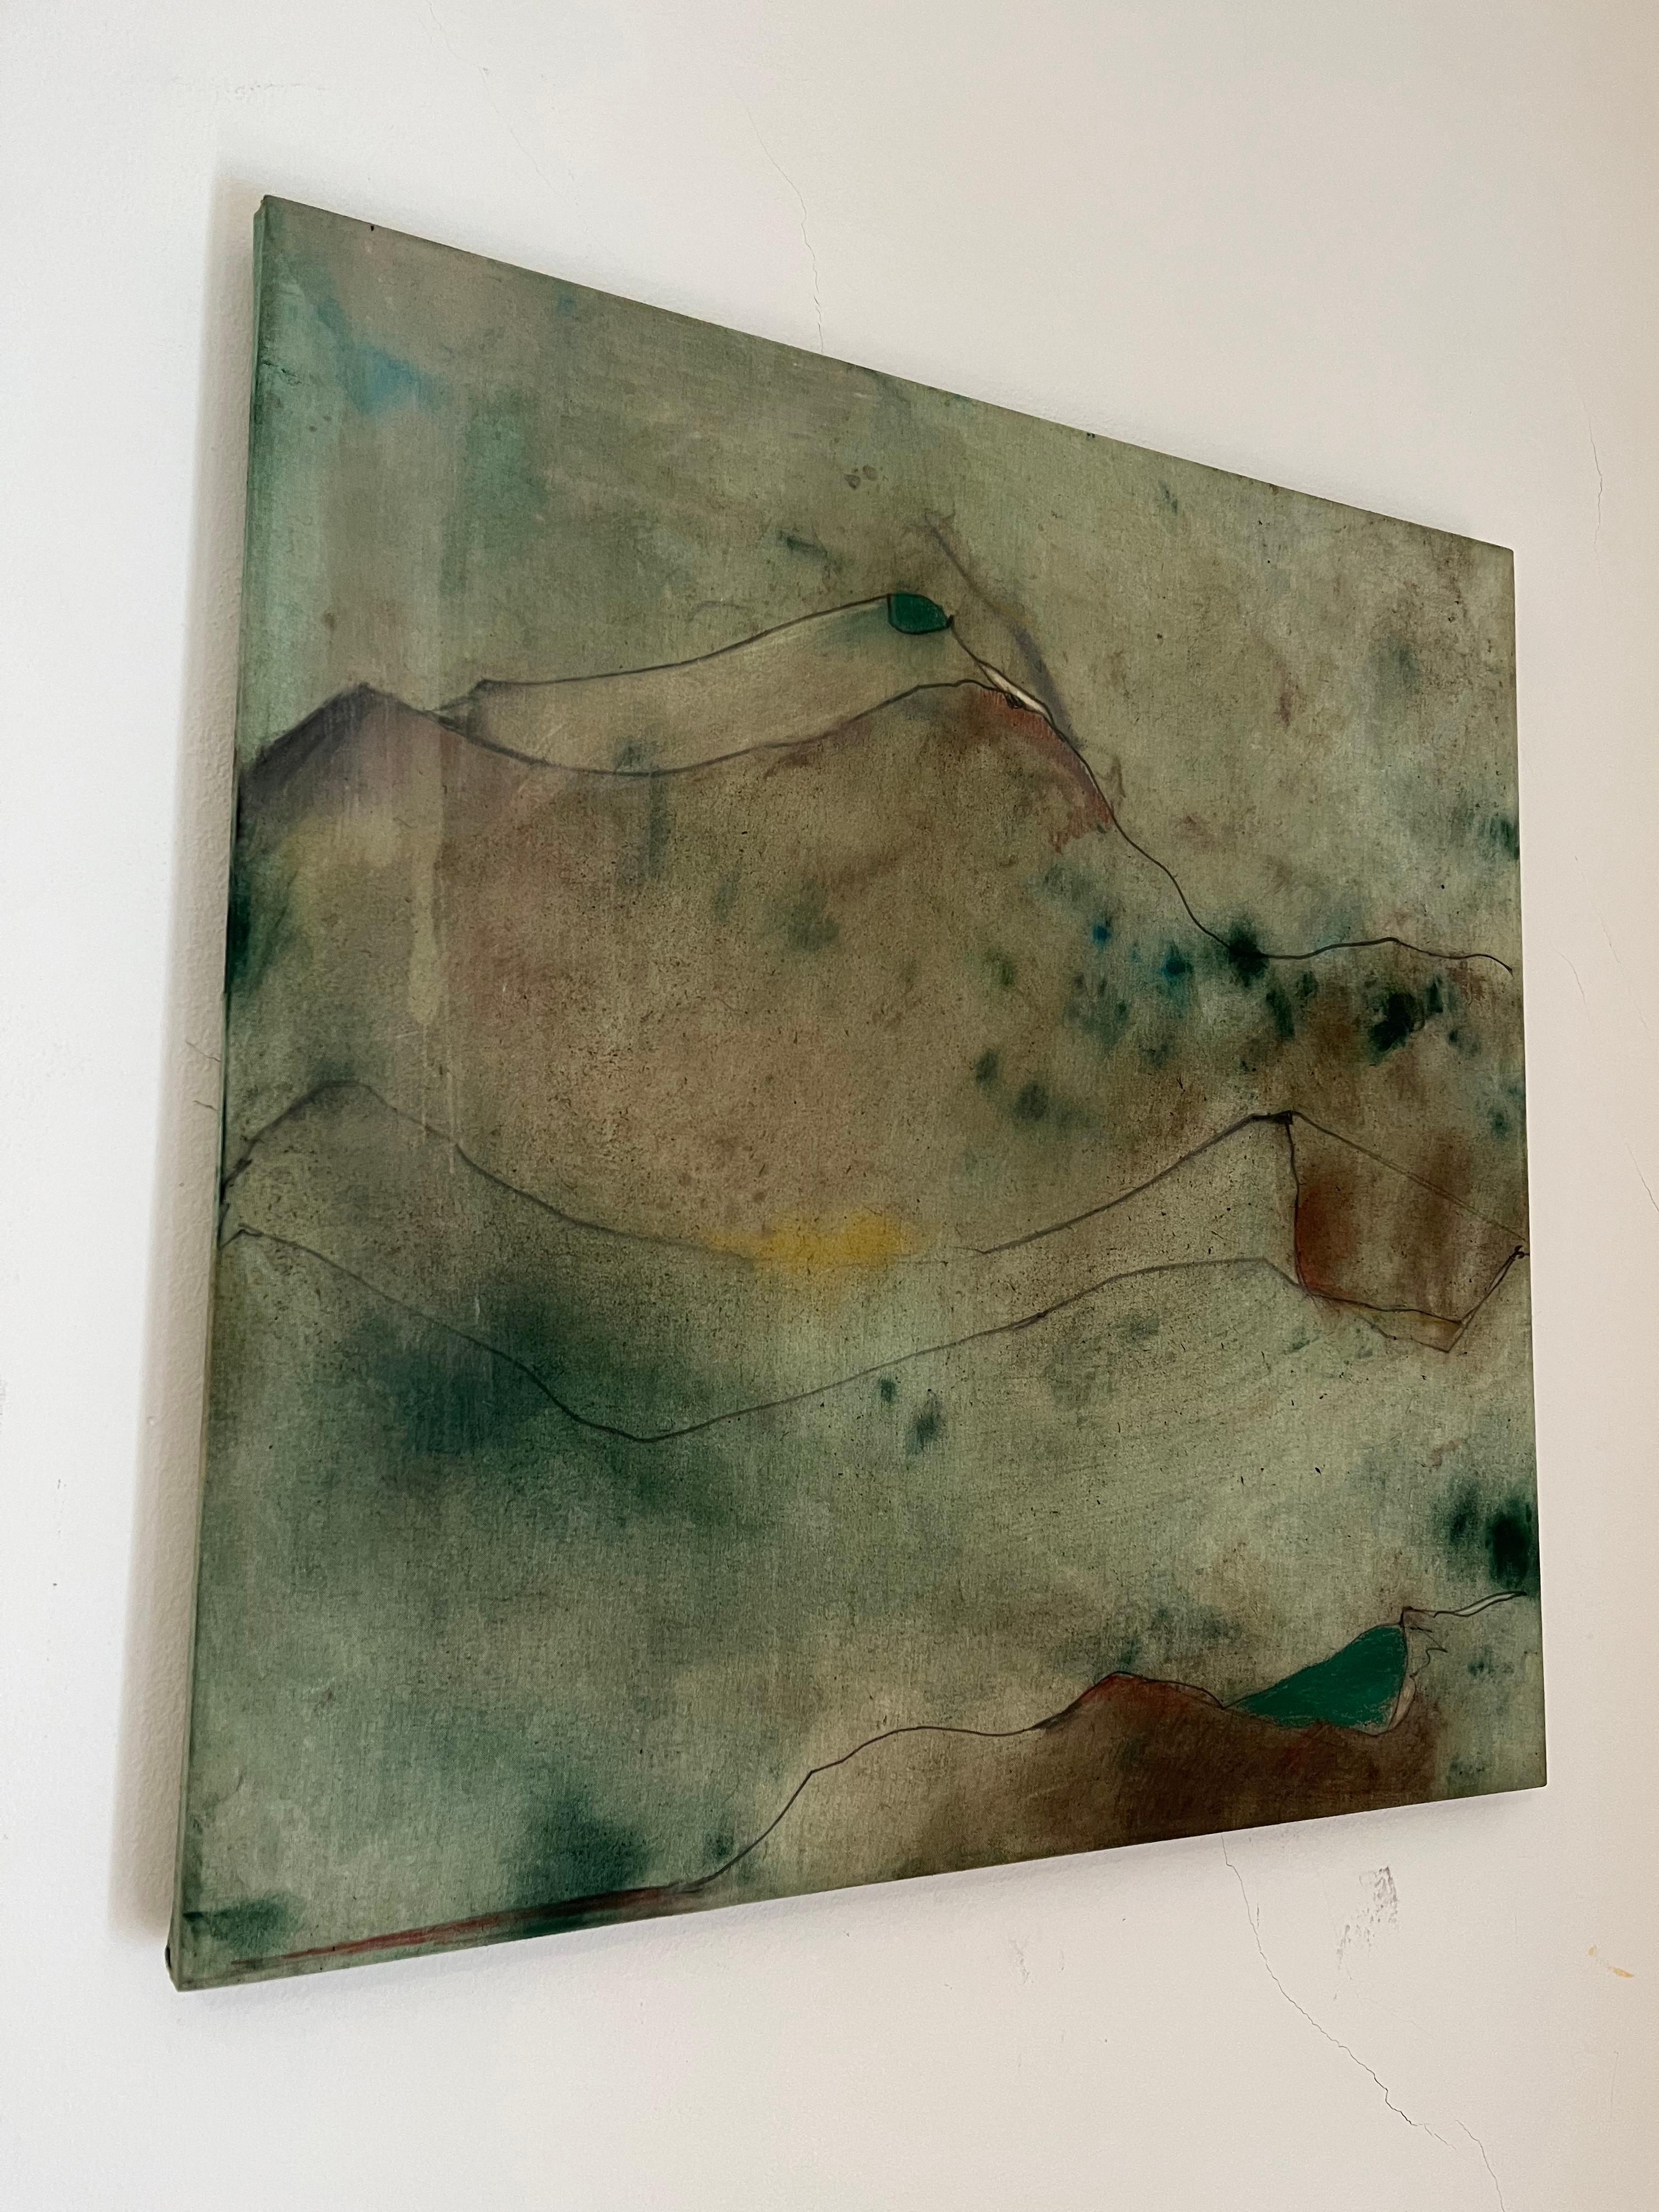 Ground
oil  on natural cotton canvas
70X70 cm

original artwork made in Italy
the painting is sold stretched out on a wooden frame ready to hang

My painting tells of the relationship between man, nature and time, the landscape, the sign and the